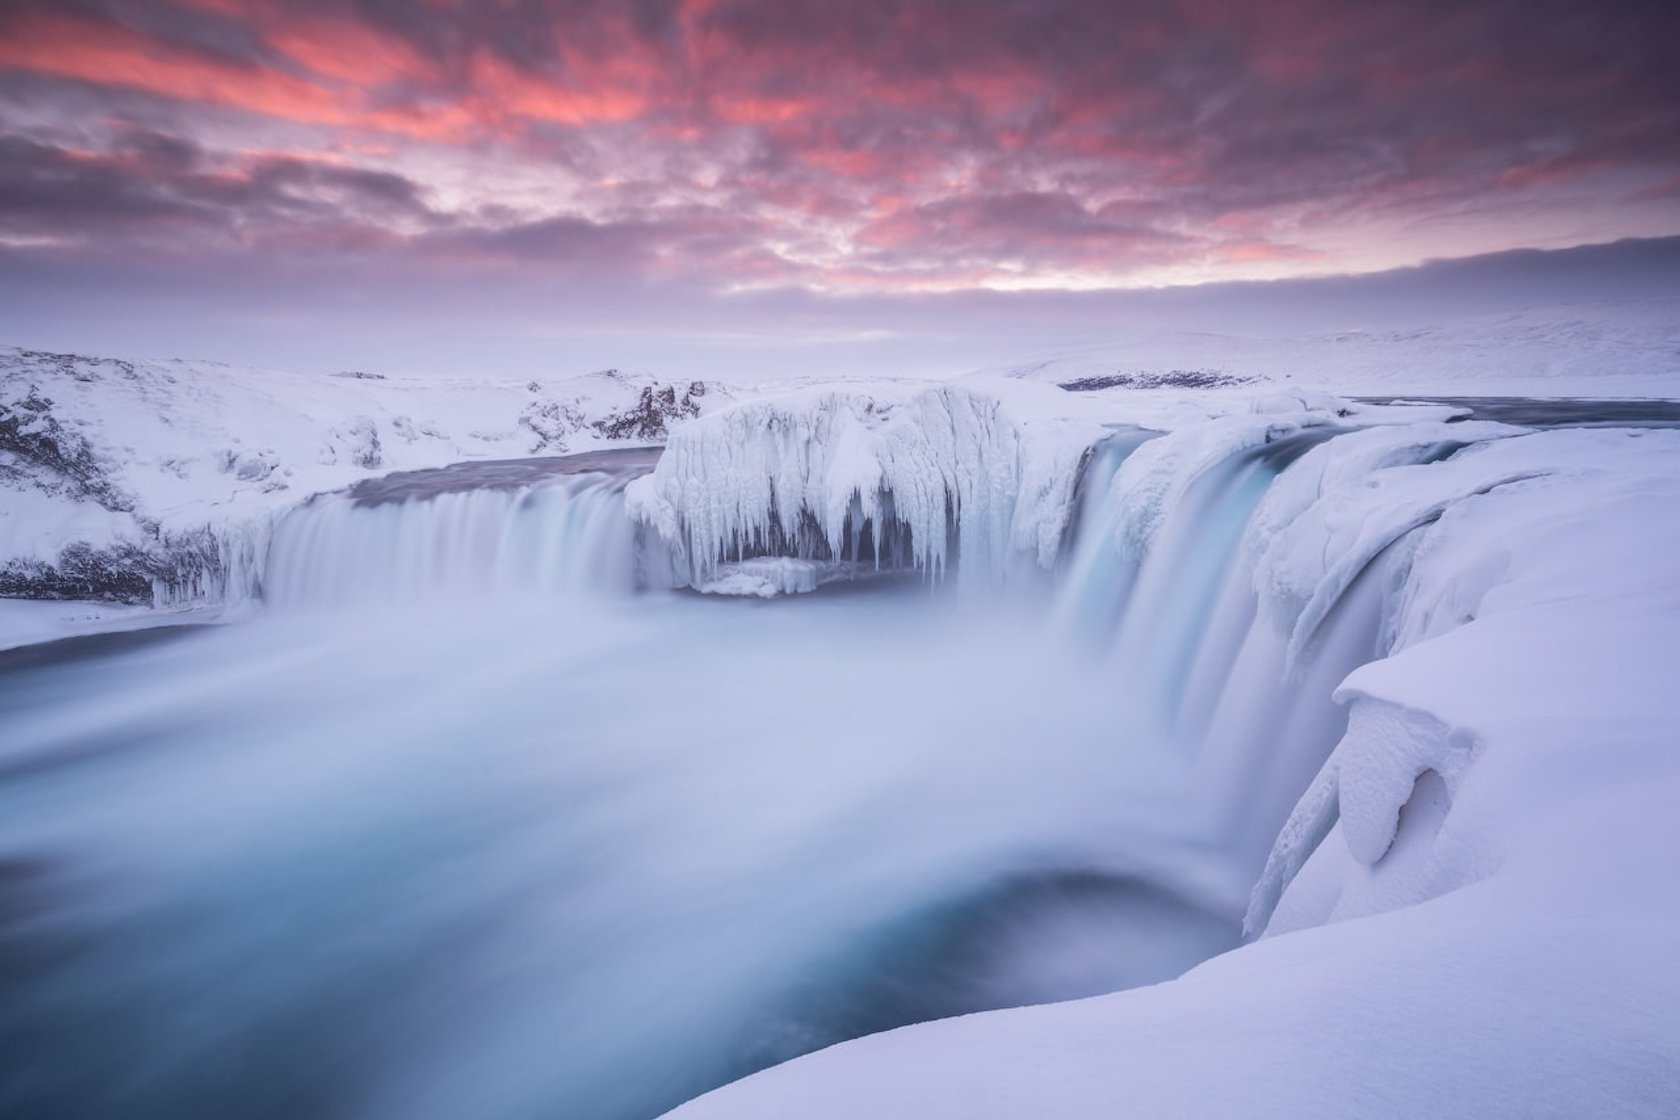 Traveling to Iceland can dramatically improve your photography skills and even unlock new life opportunities.(4)